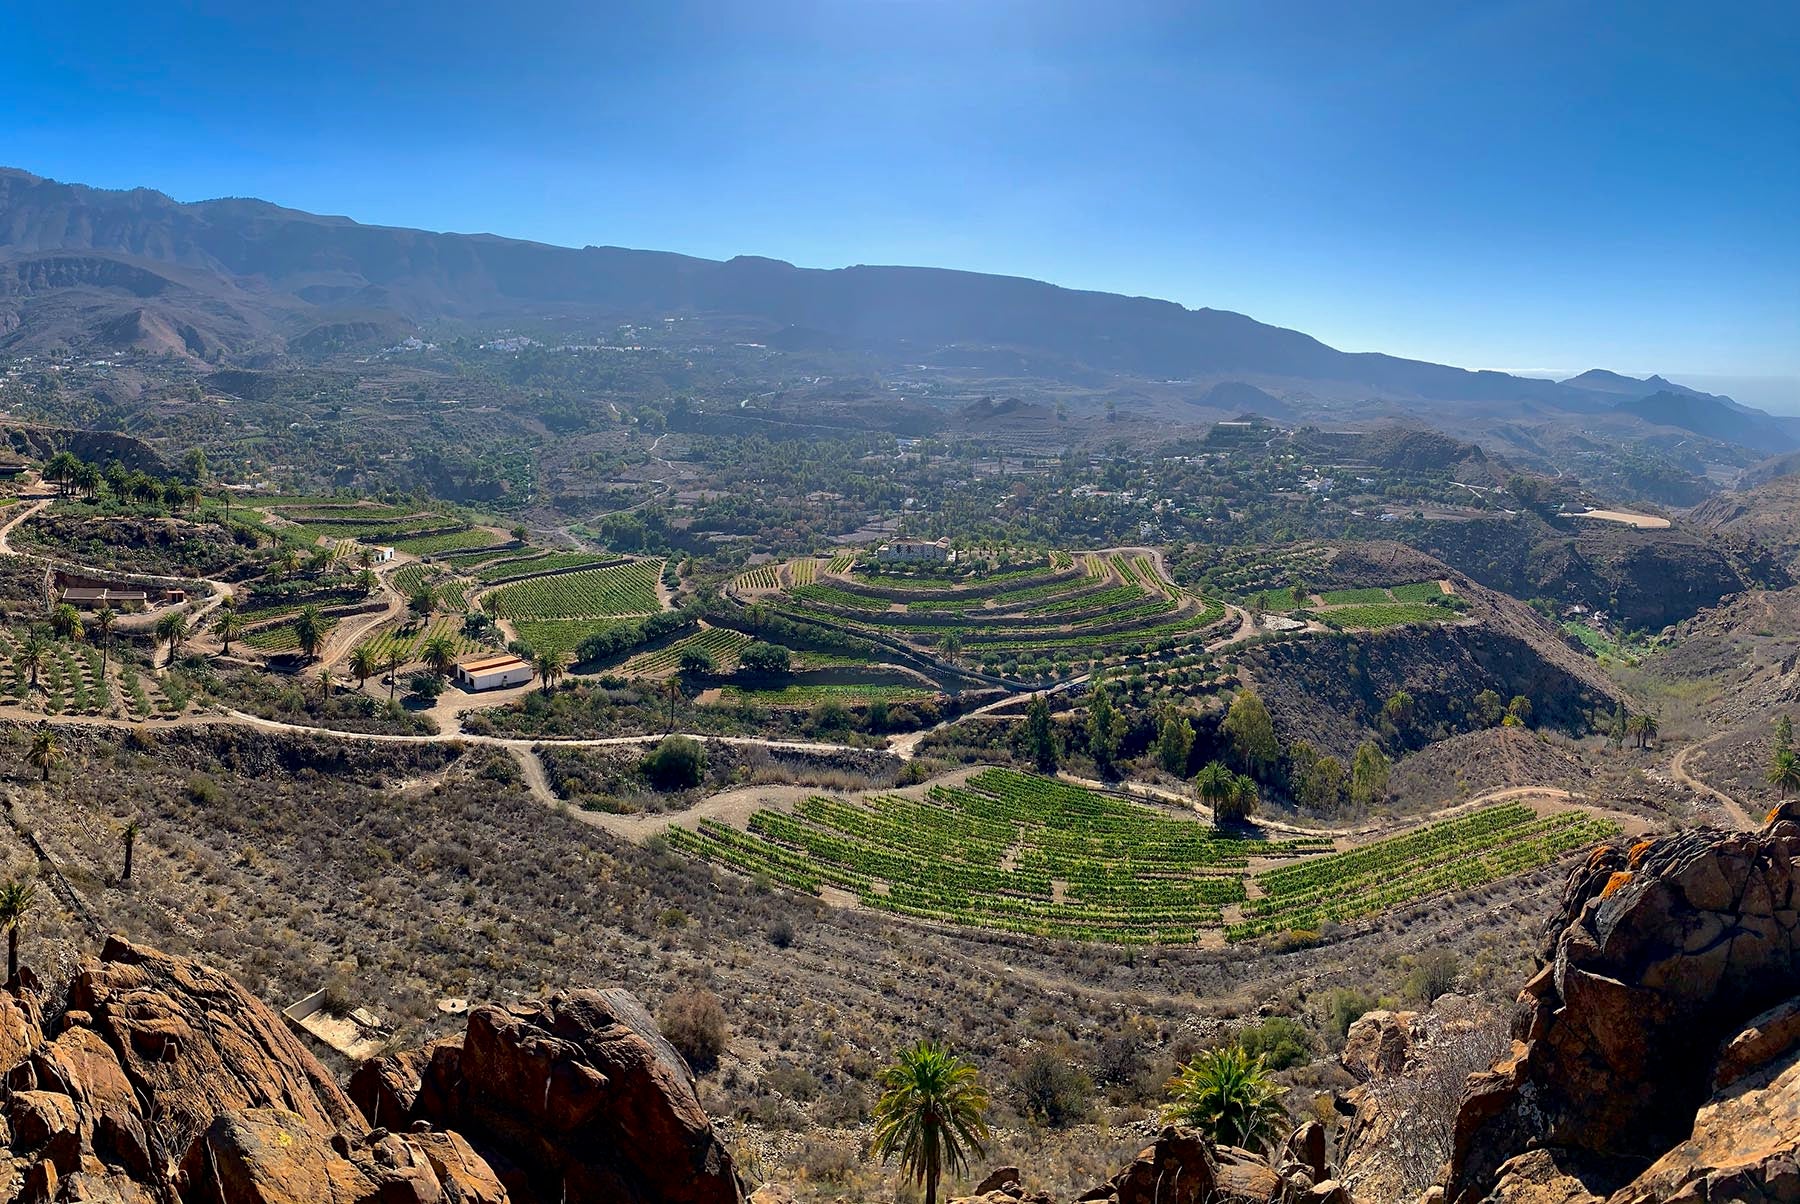 Bodegas Tameran nestled in the breathtaking hills of The Canary Islands, surrounded by organic vineyards